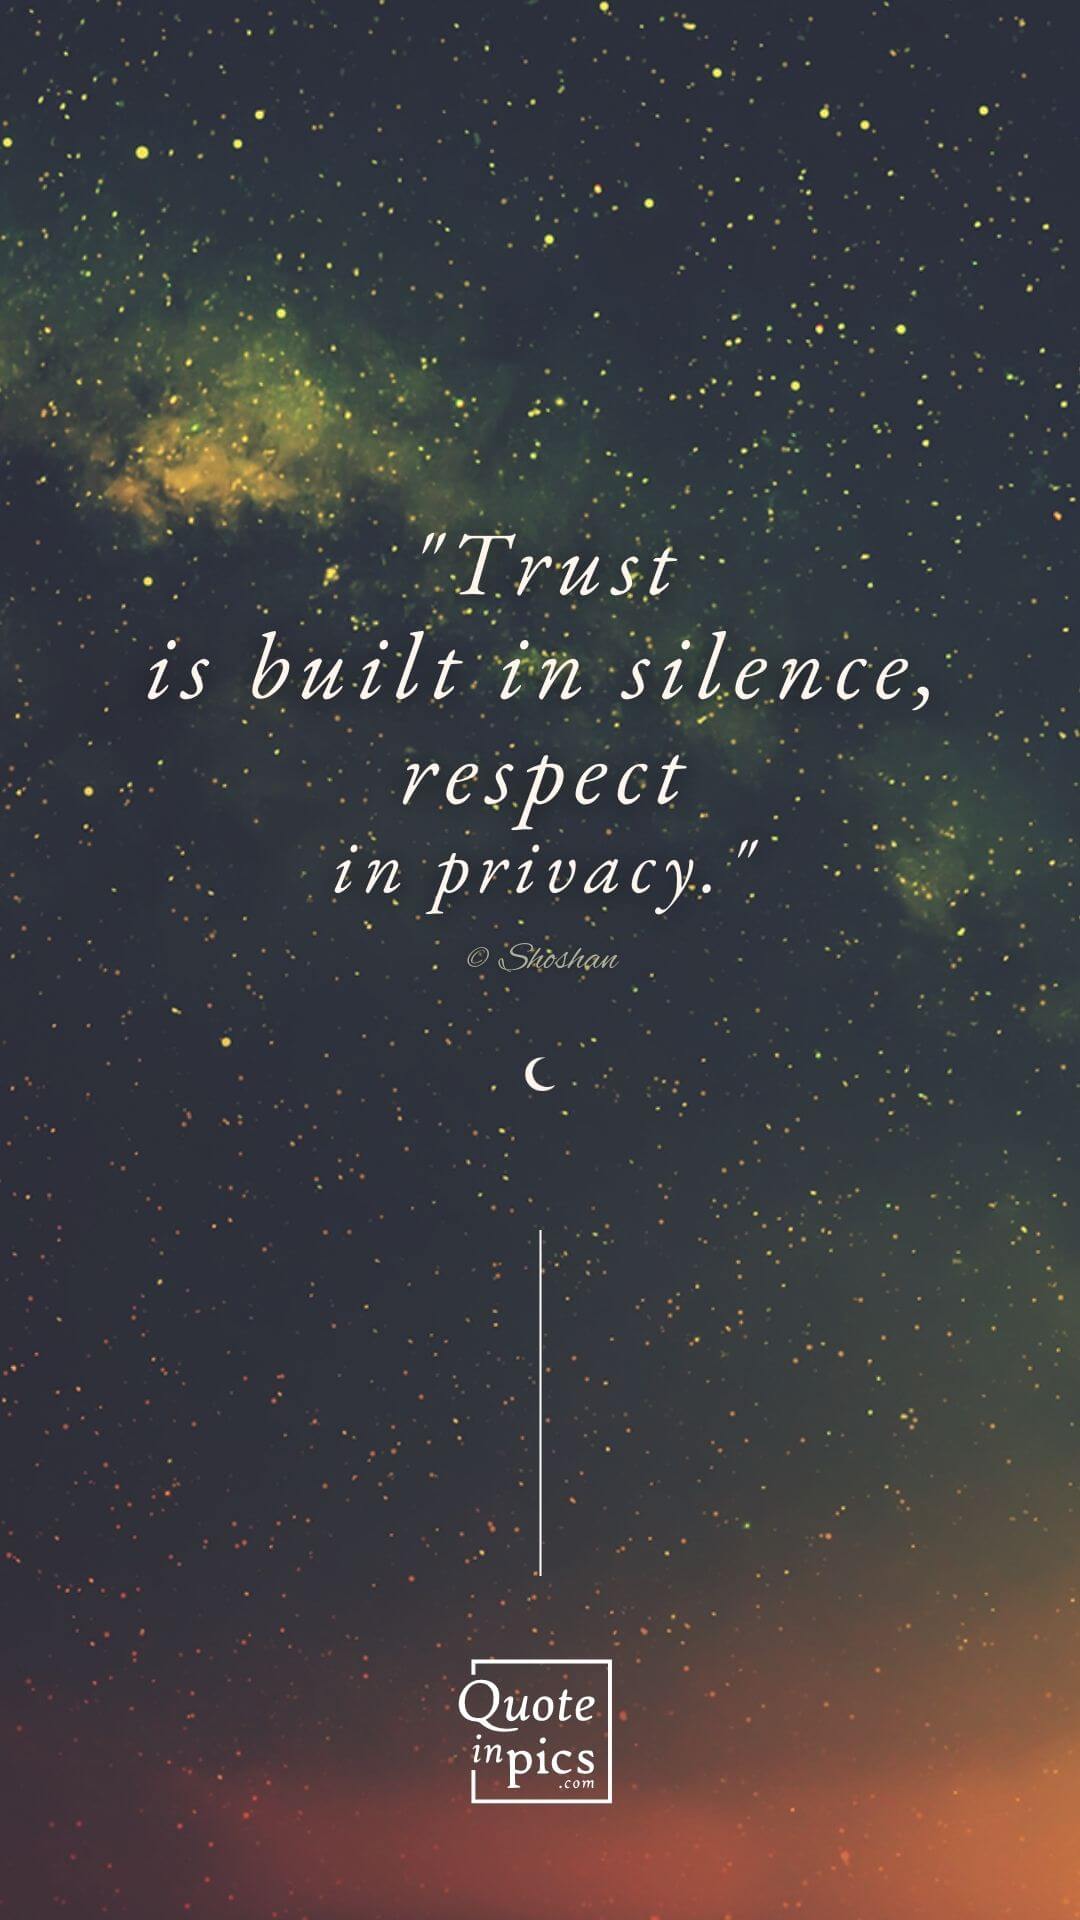 "Trust is built in silence, respect in privacy." © Shoshan